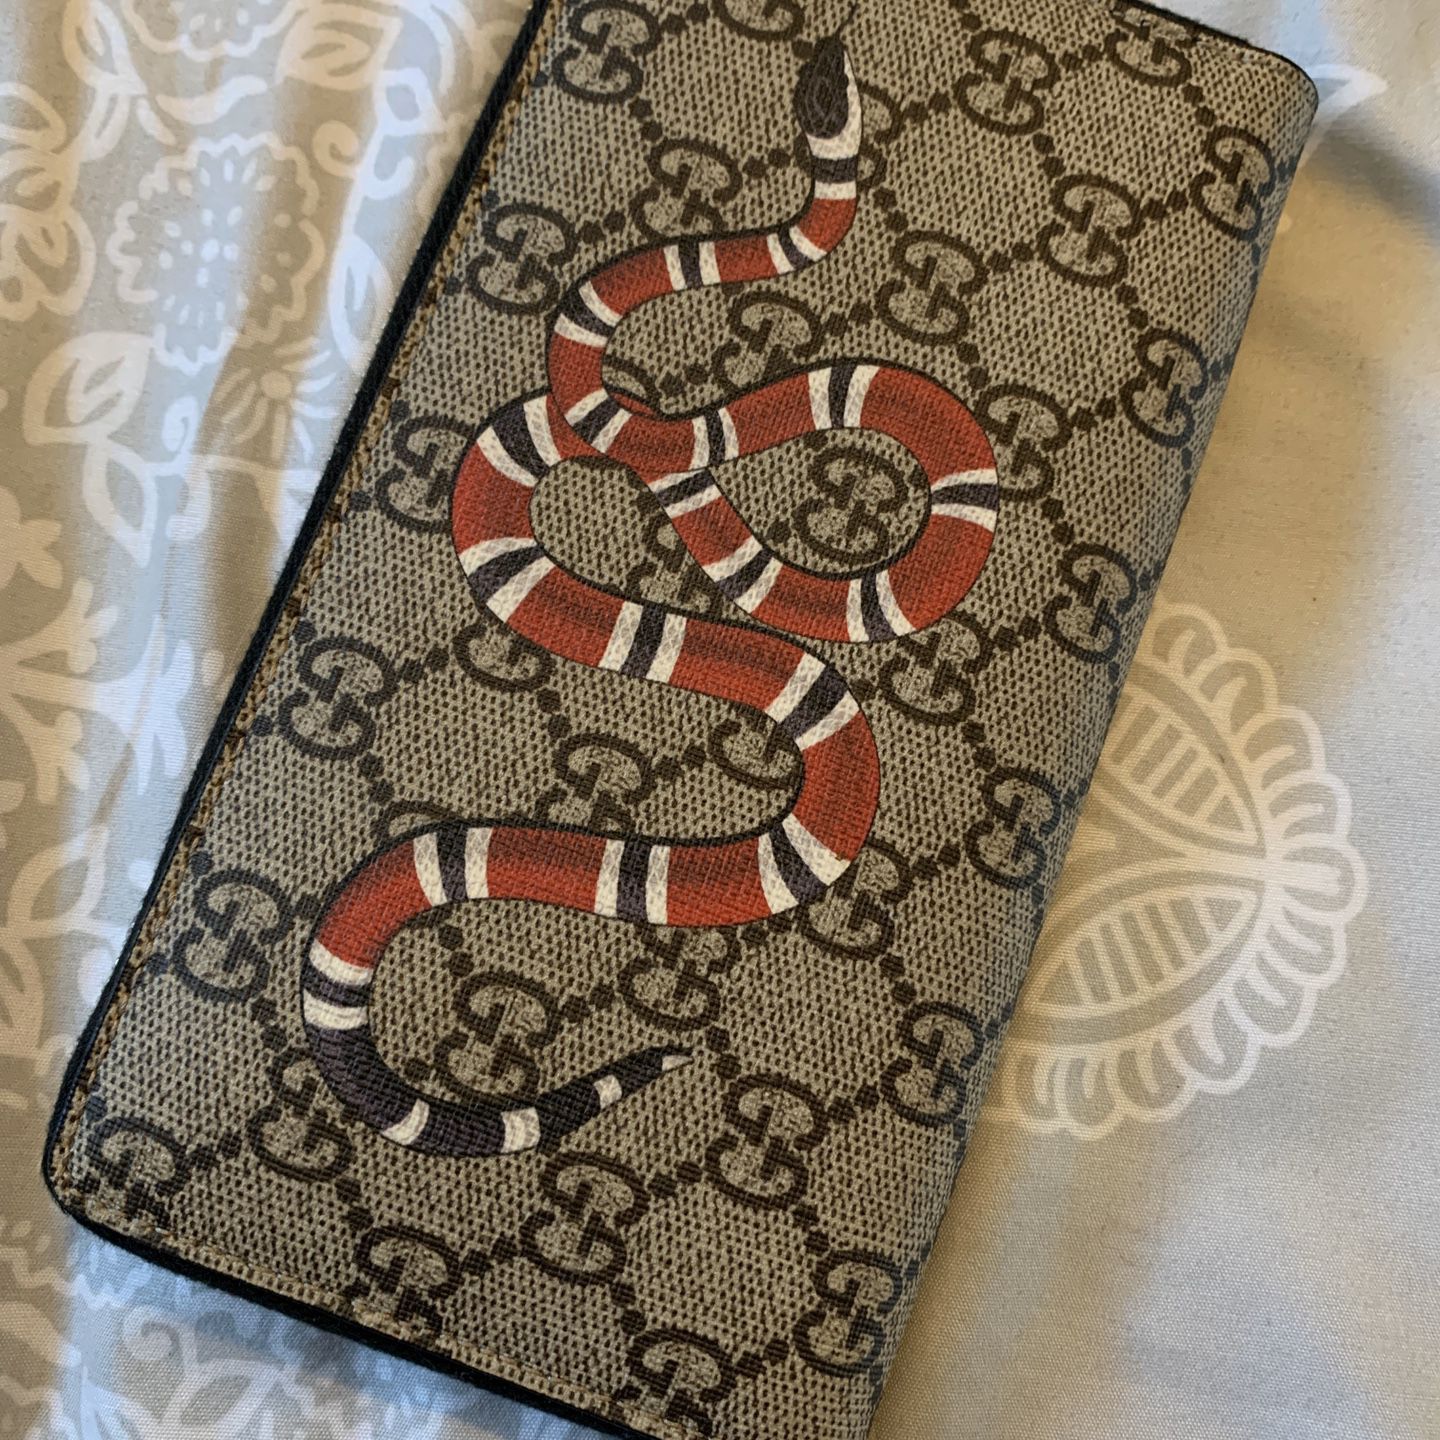 Gucci GG Supreme Limited Edition. for Sale in Downey, CA - OfferUp